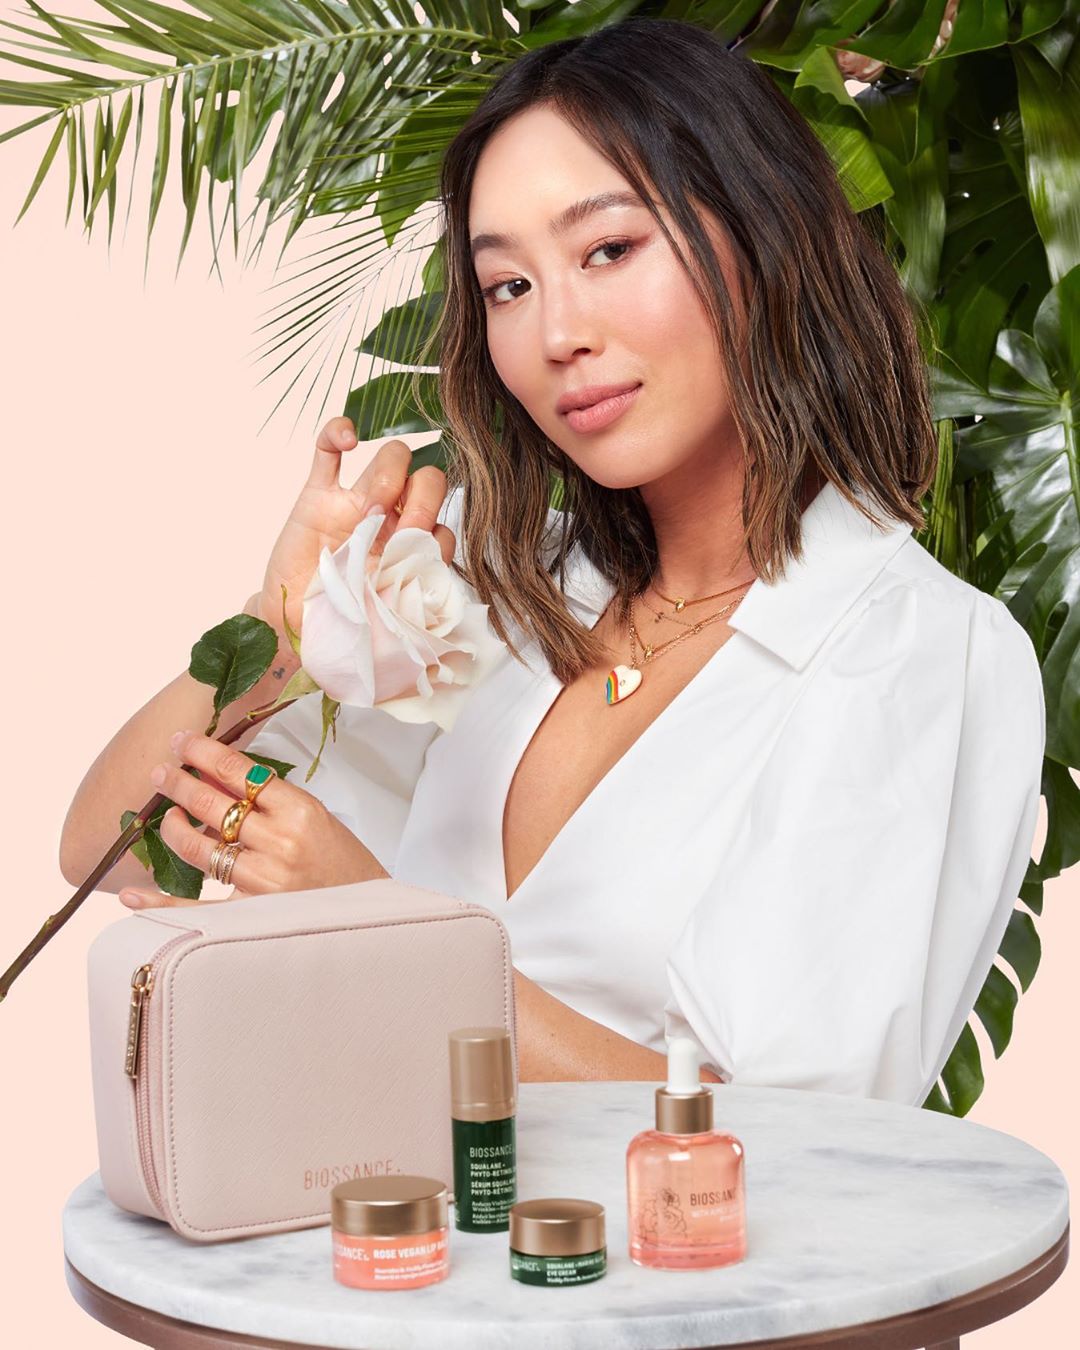 Aimee Song Teams Up With Biossance on Squalane + Vitamin C Rose Oil